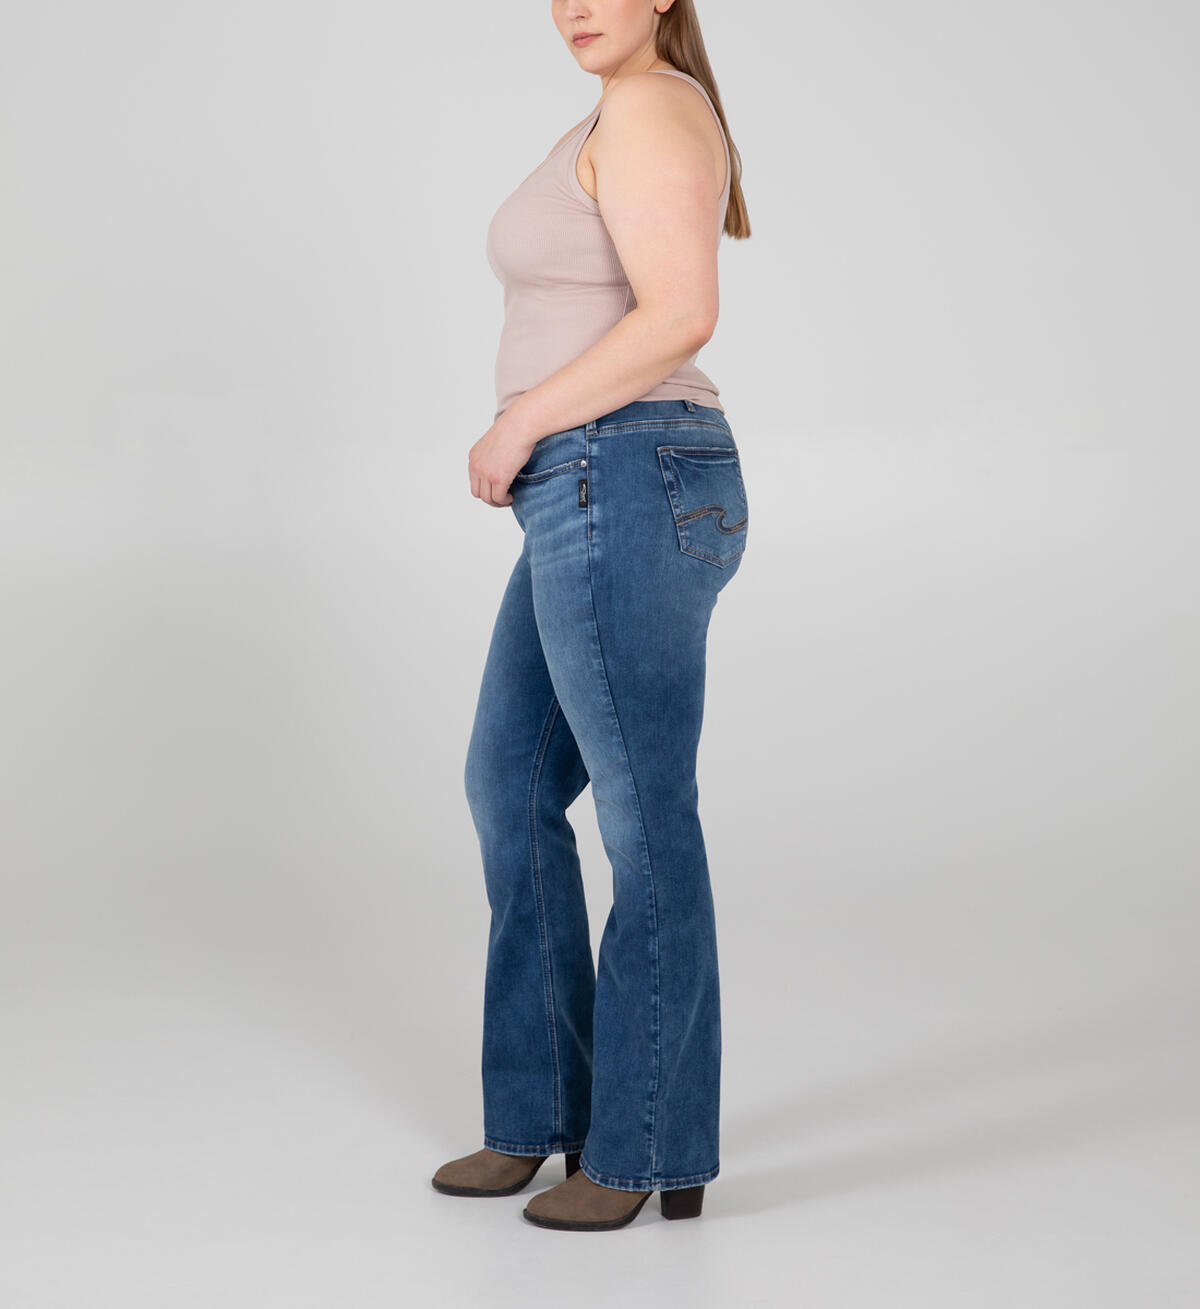 Elyse Mid Rise Slim Bootcut Jeans Plus Size - Eco-Friendly Fabric, , hi-res image number 2